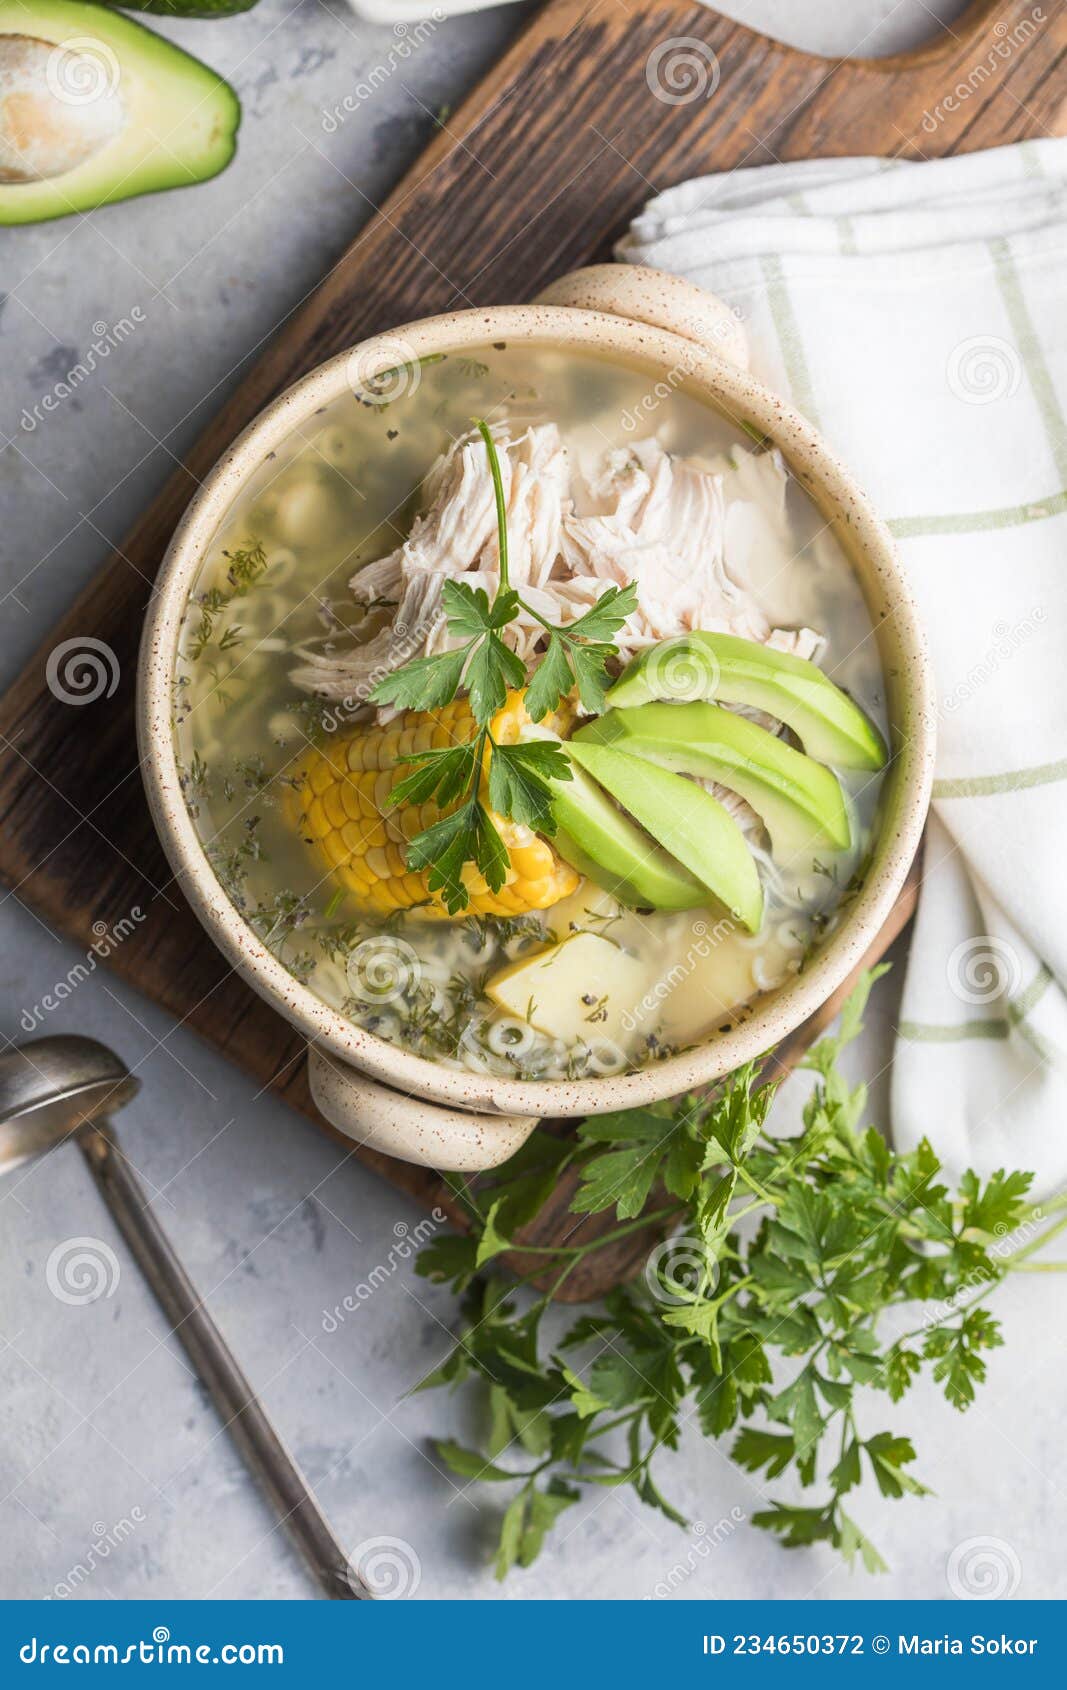 traditional ajiaco colombiano - colombian soup with potato, chicken, avocado